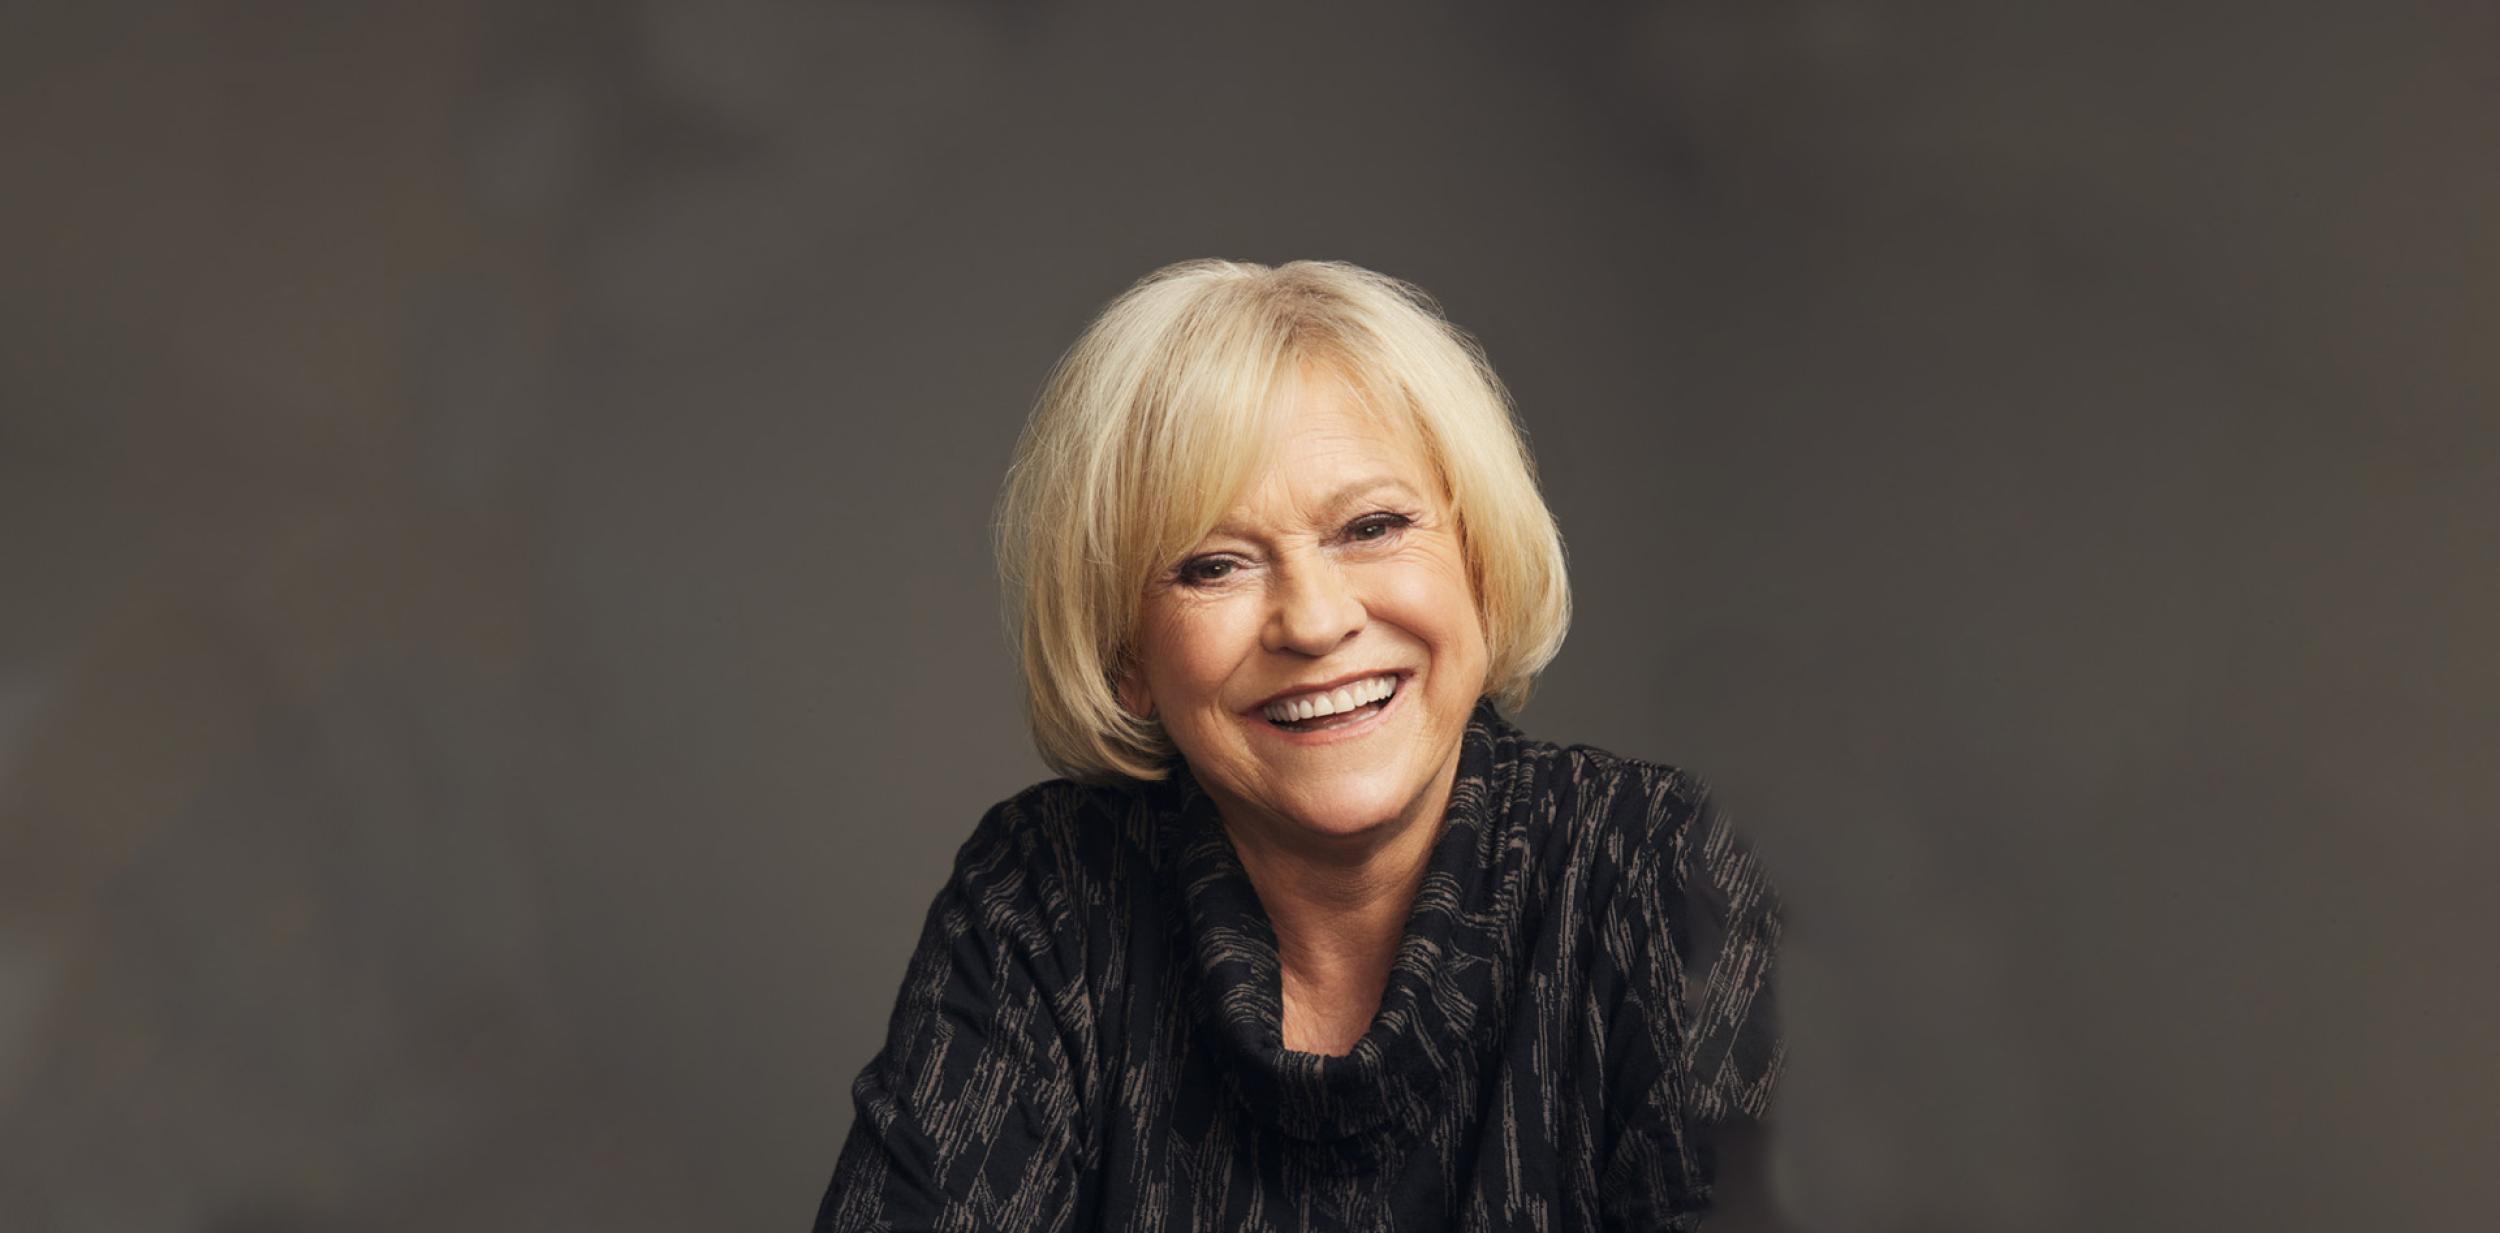 Image of Sue Barker smiling